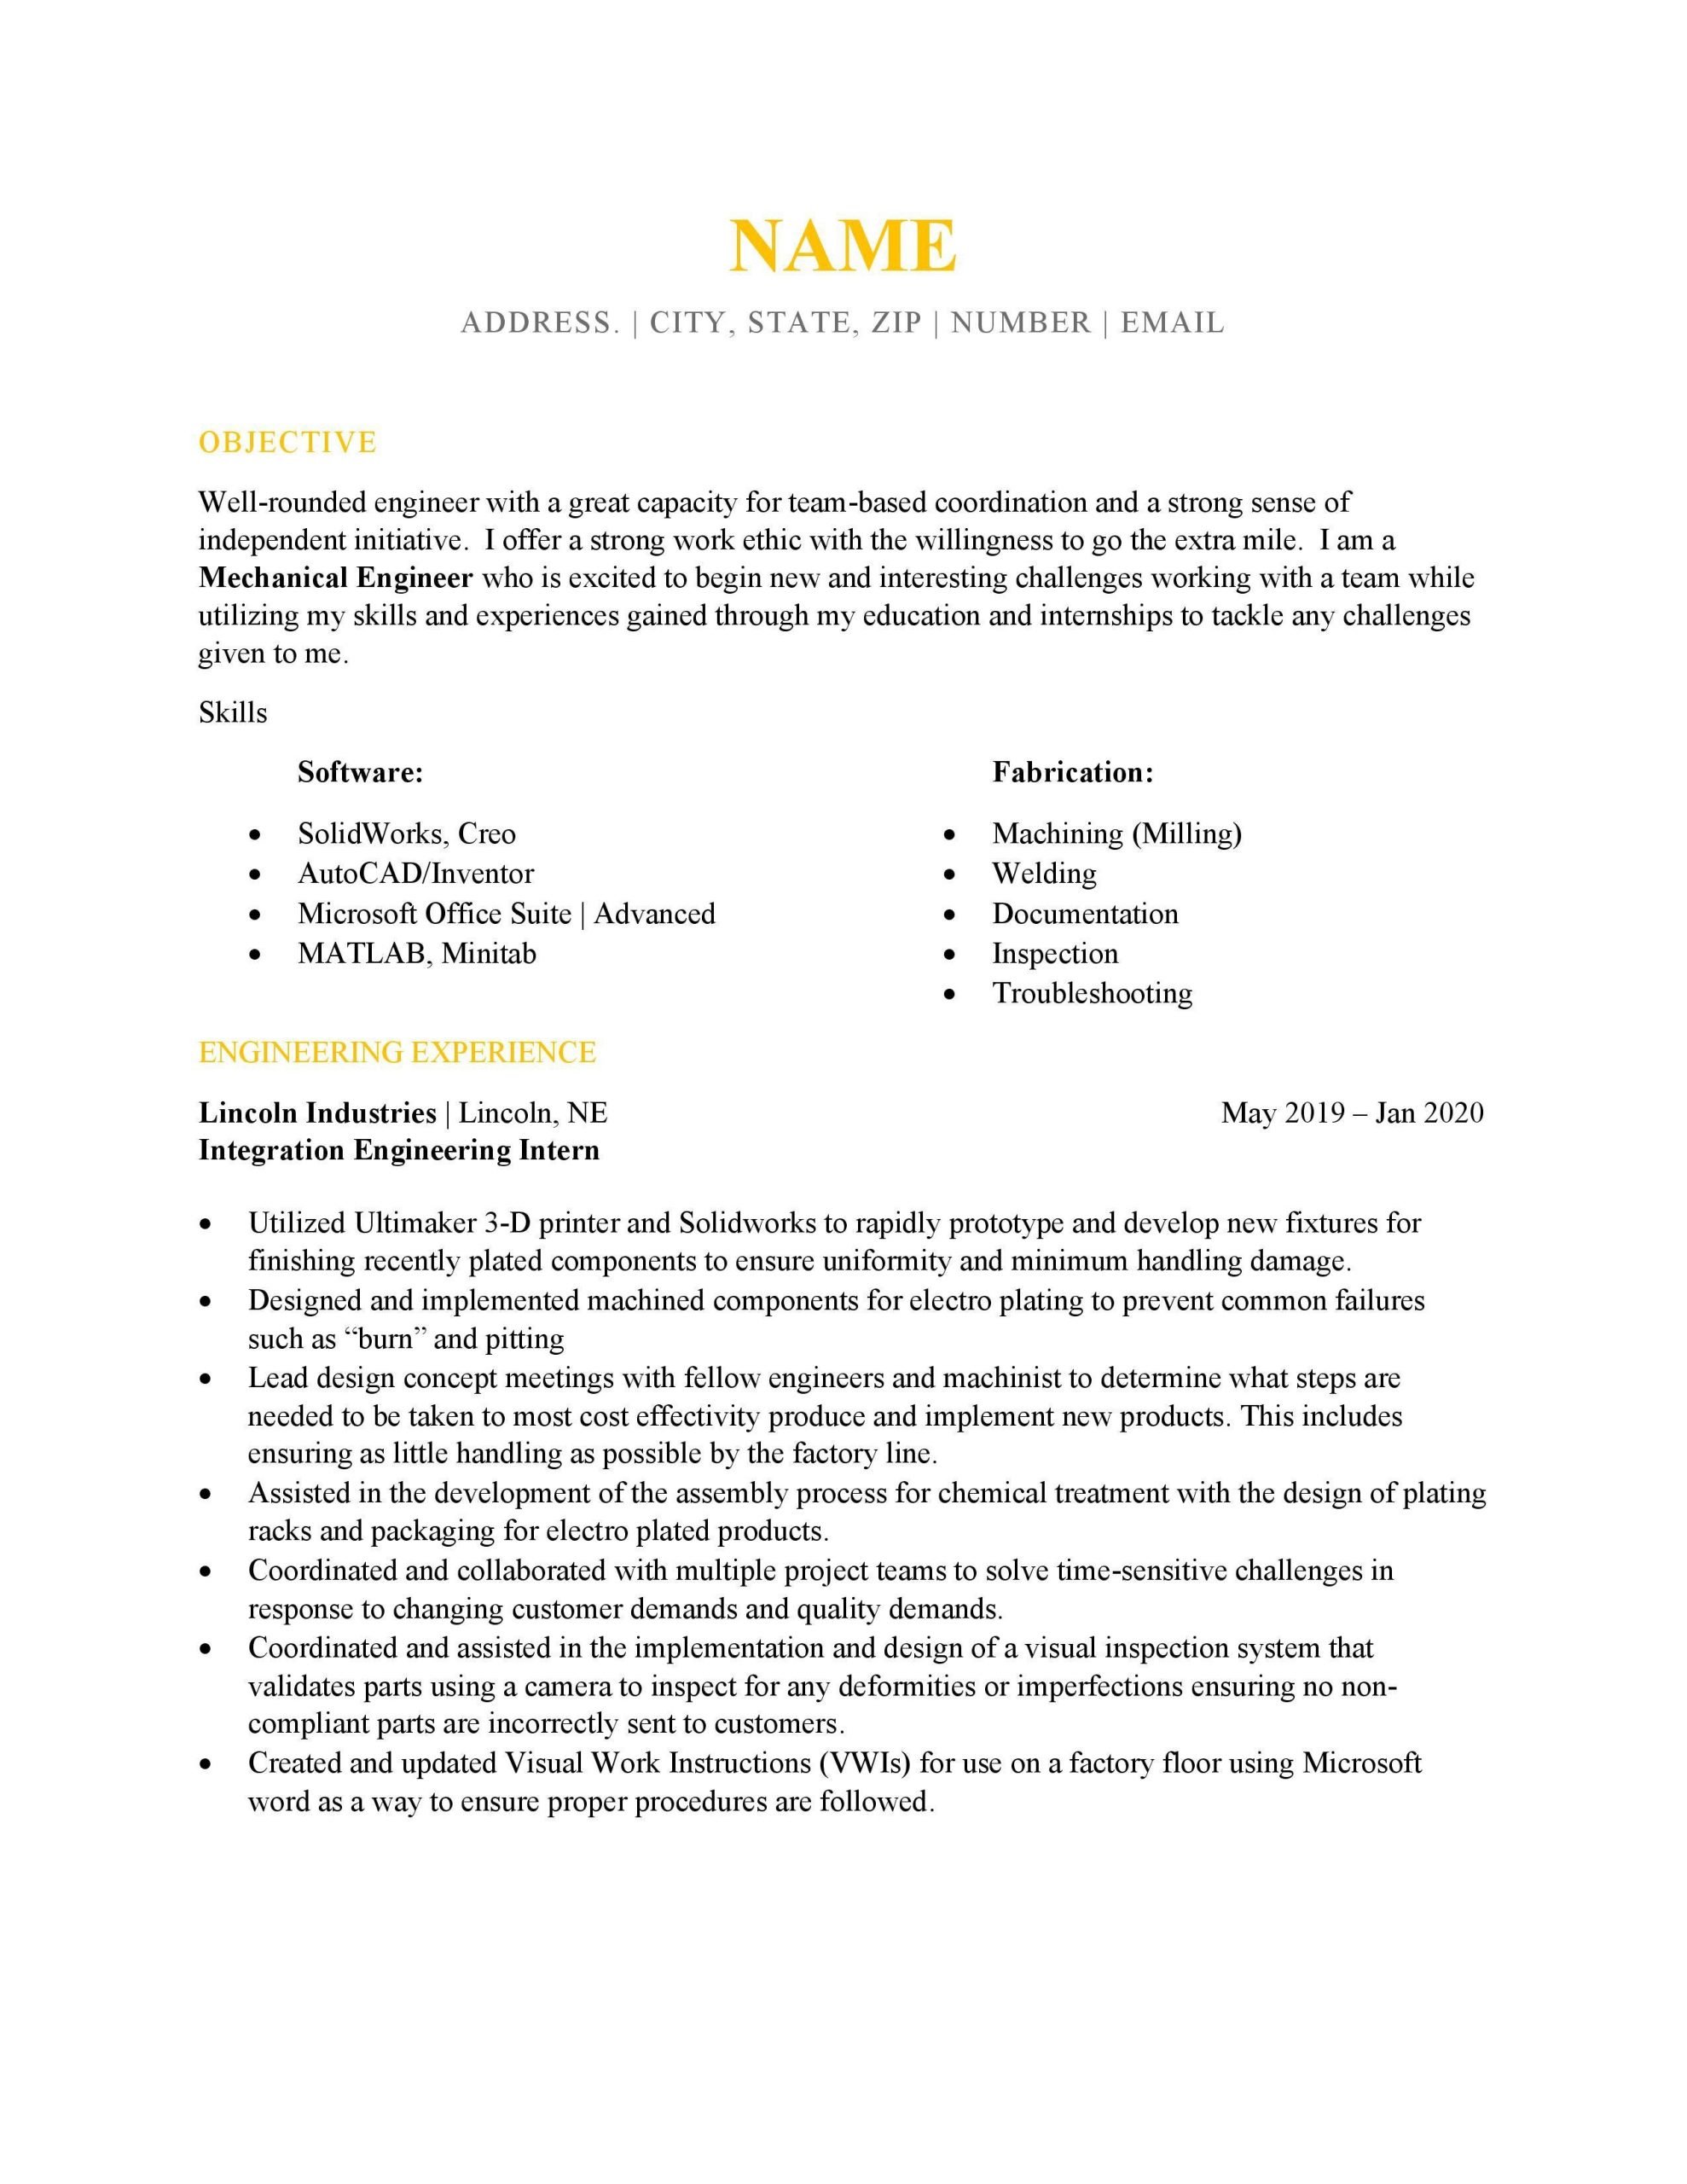 Does a resume for a recently graduated engineer need to be one page ...